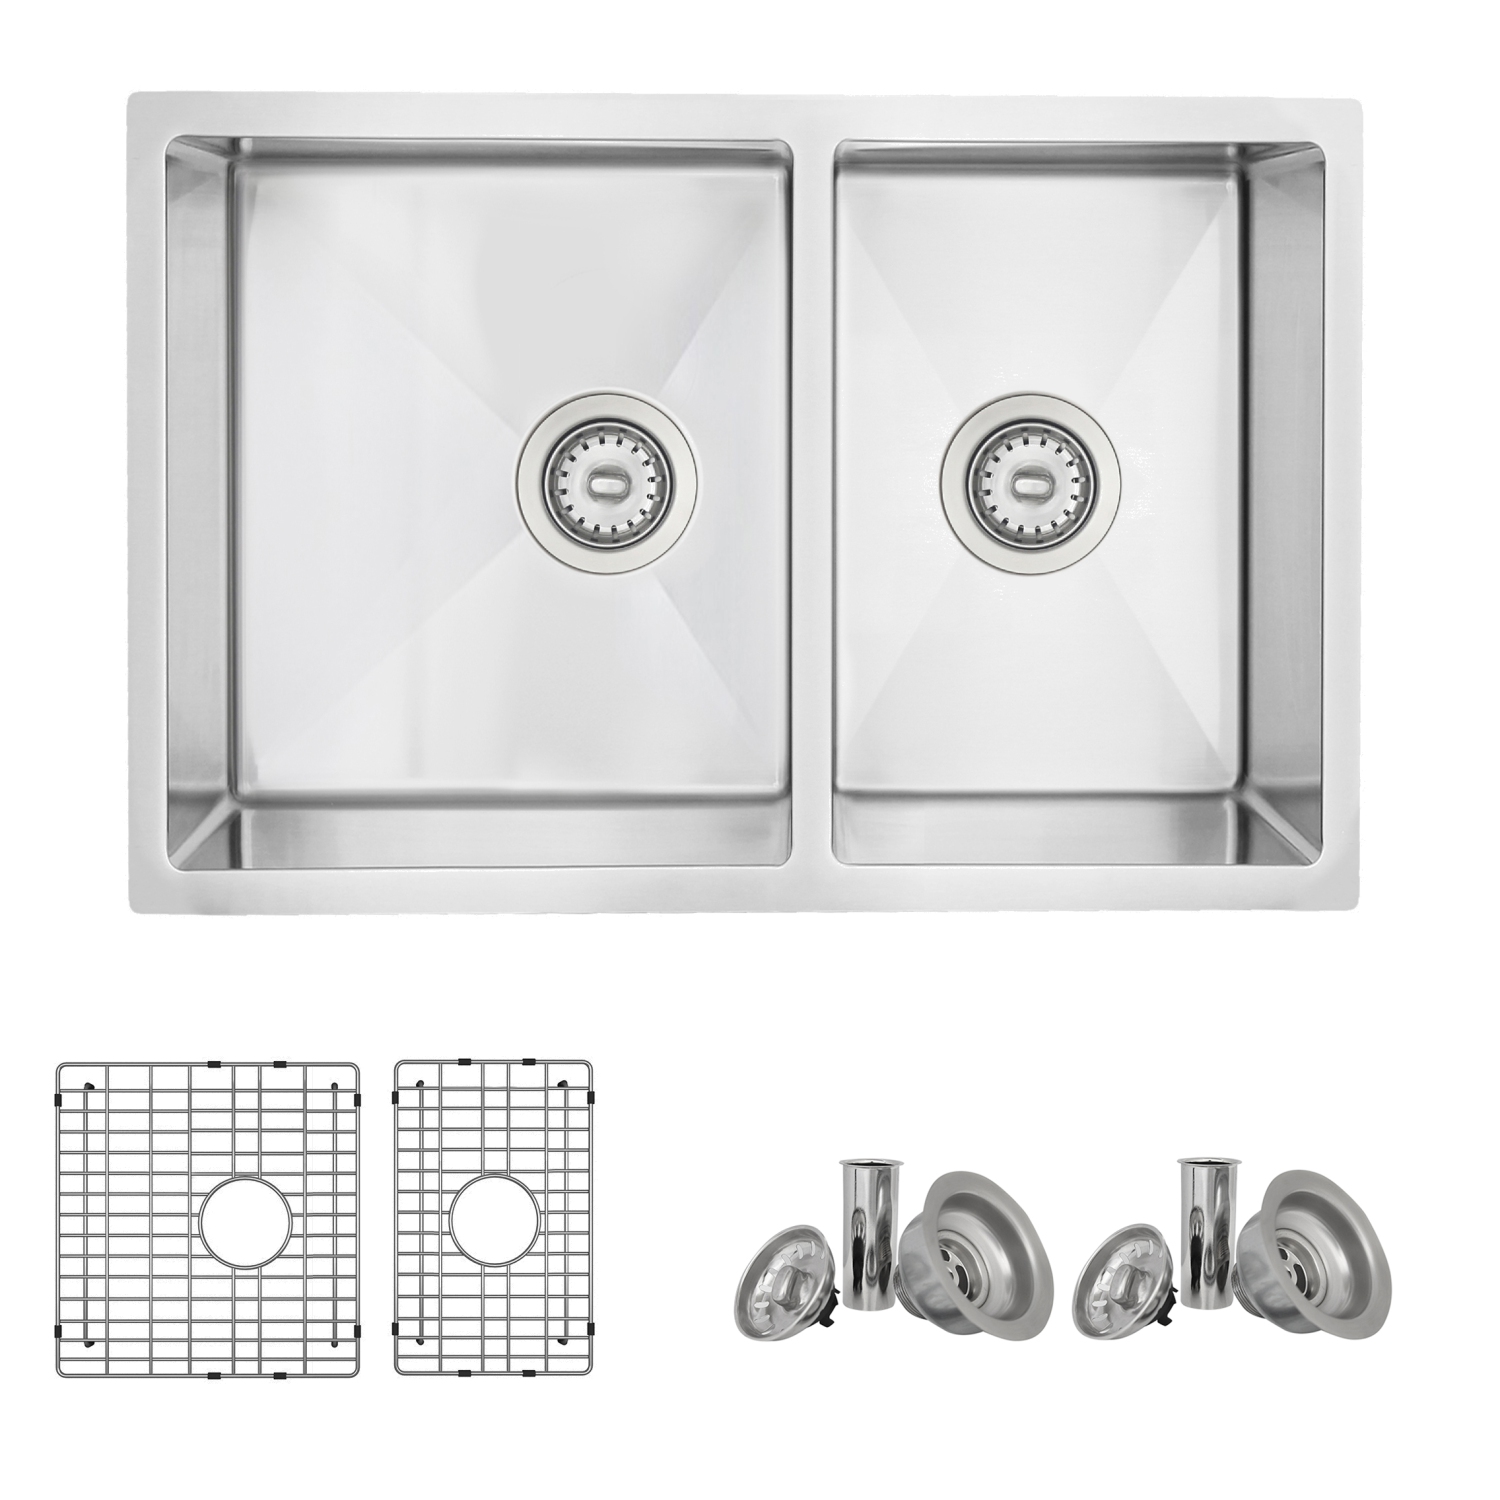 STYLISH 28 inch Double Bowl 60/40 Reversible Undermount Stainless Steel Kitchen Sink with Grids and Strainers S-403G